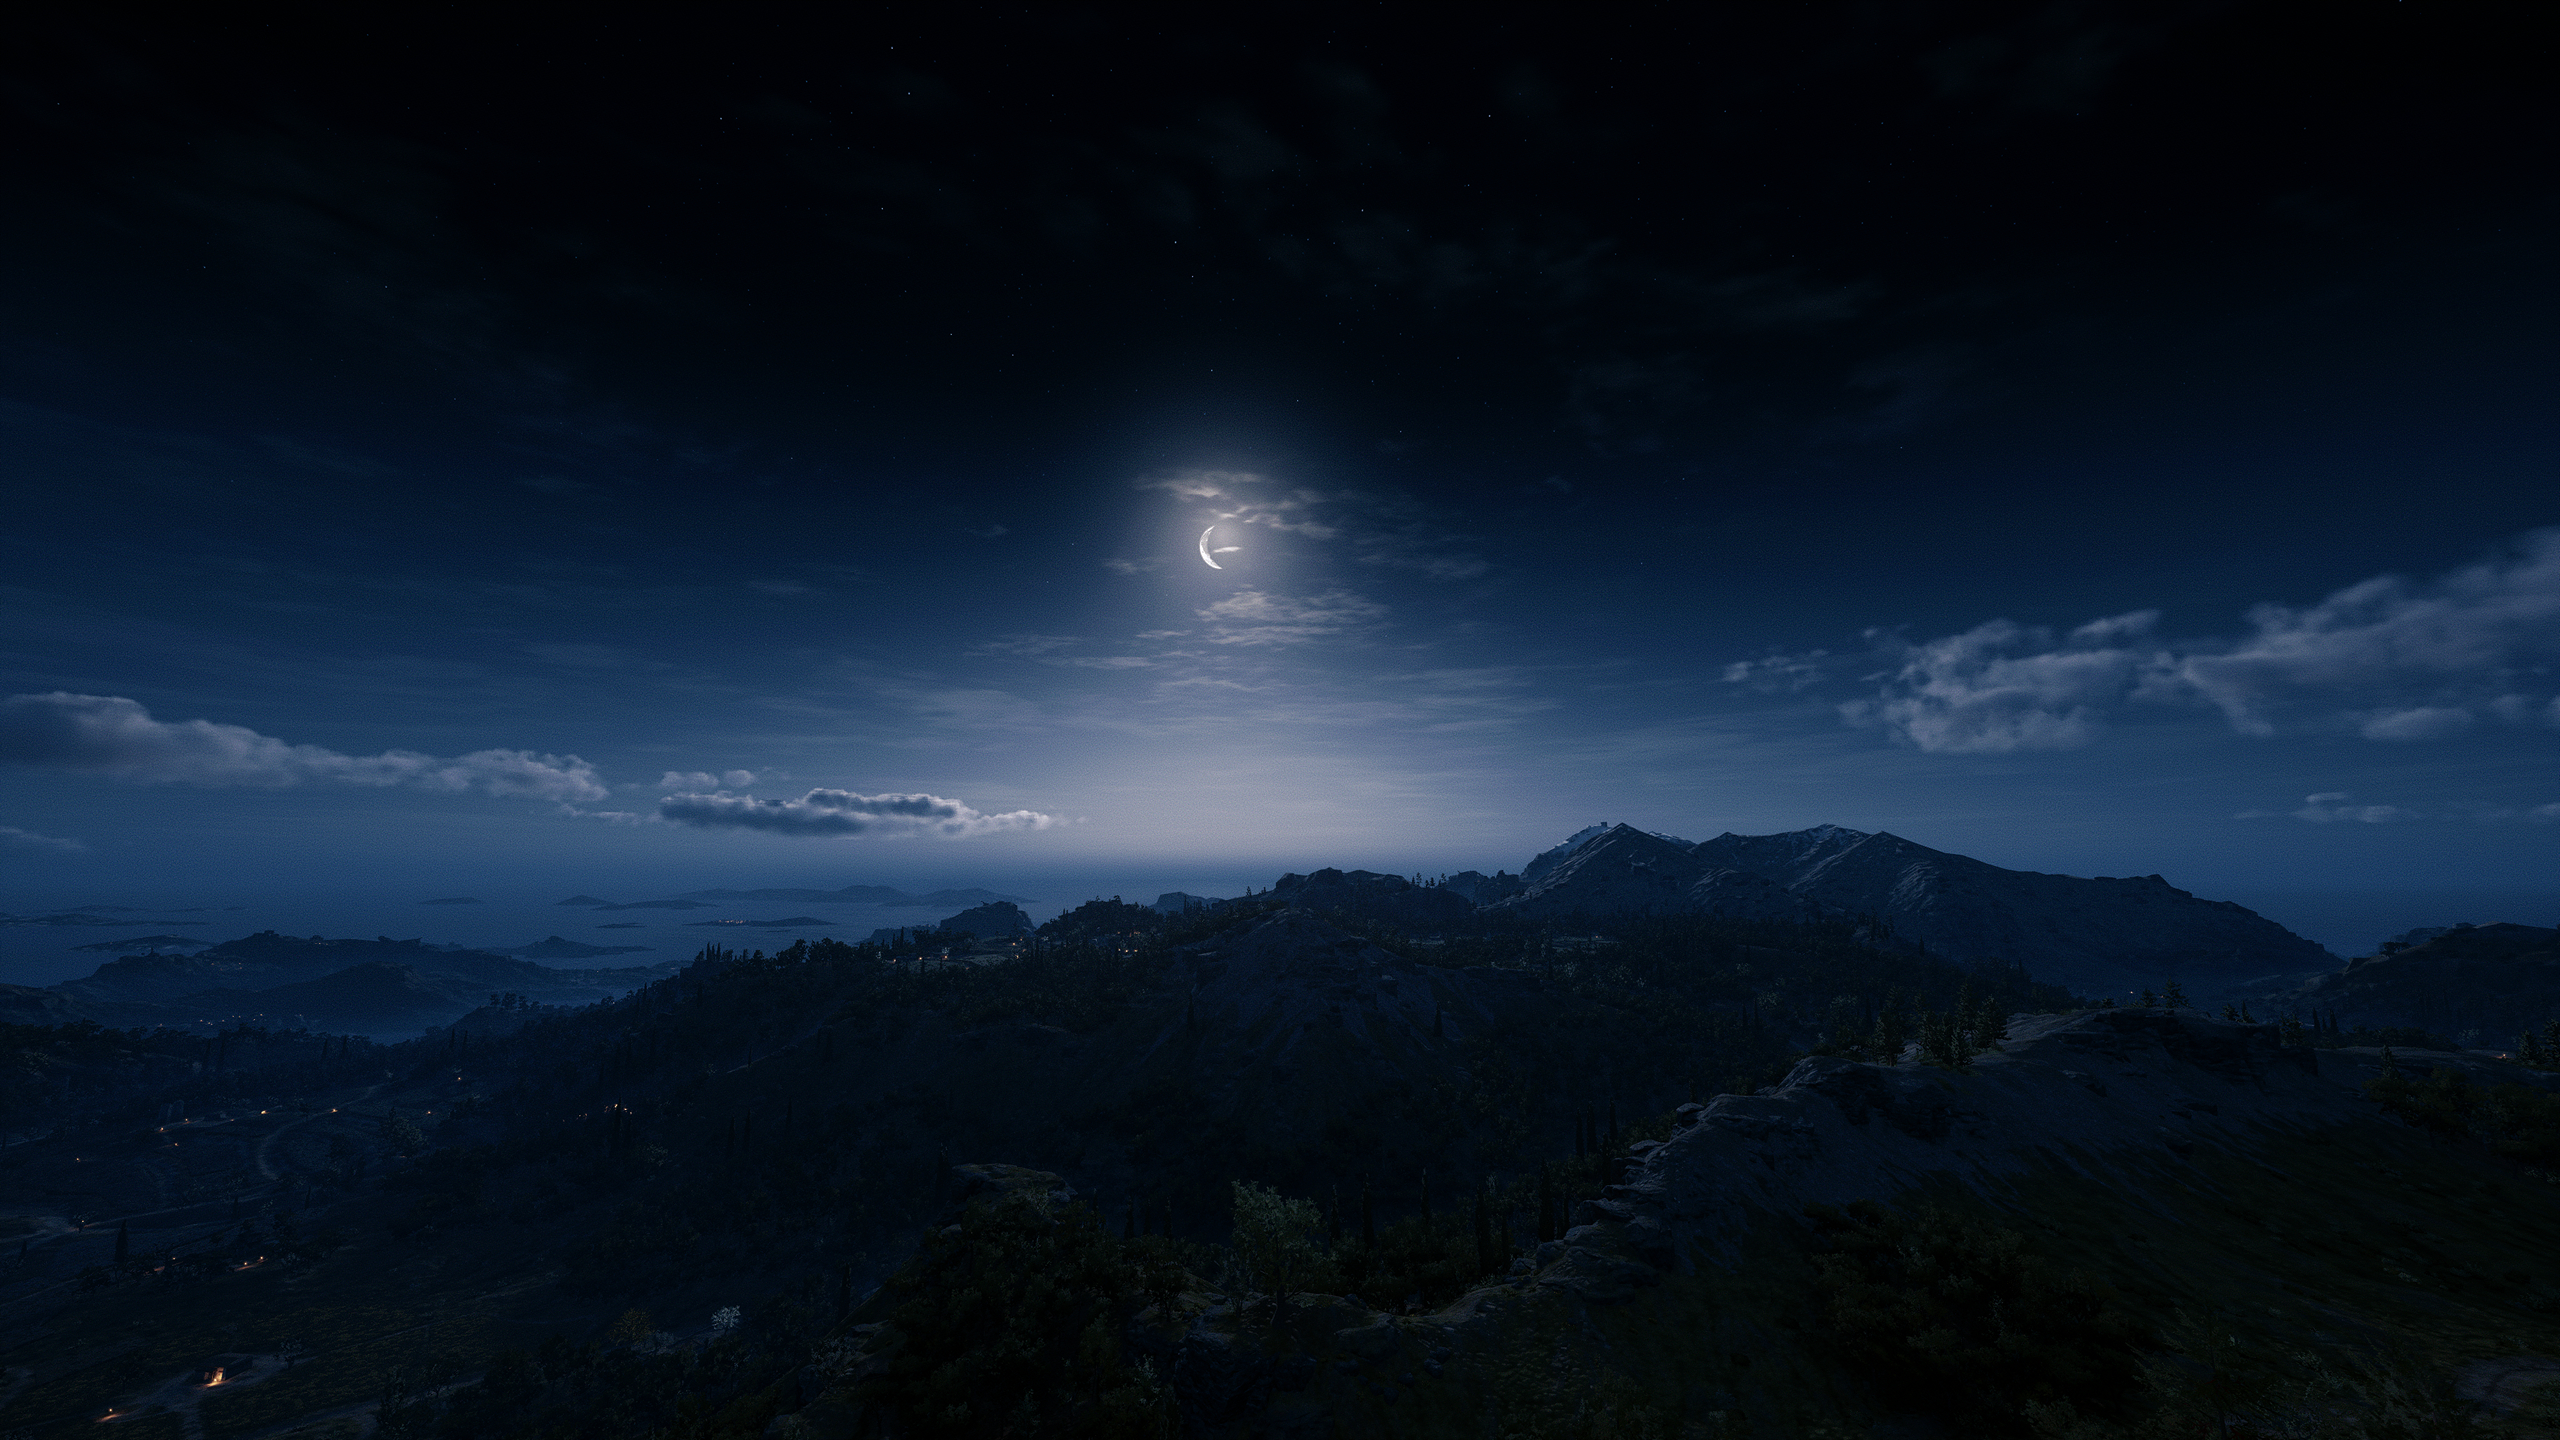 General 2560x1440 Assassin's Creed: Odyssey horizon night sky reshade PC gaming Ubisoft clouds landscape Moon trees mountains video games video game landscape